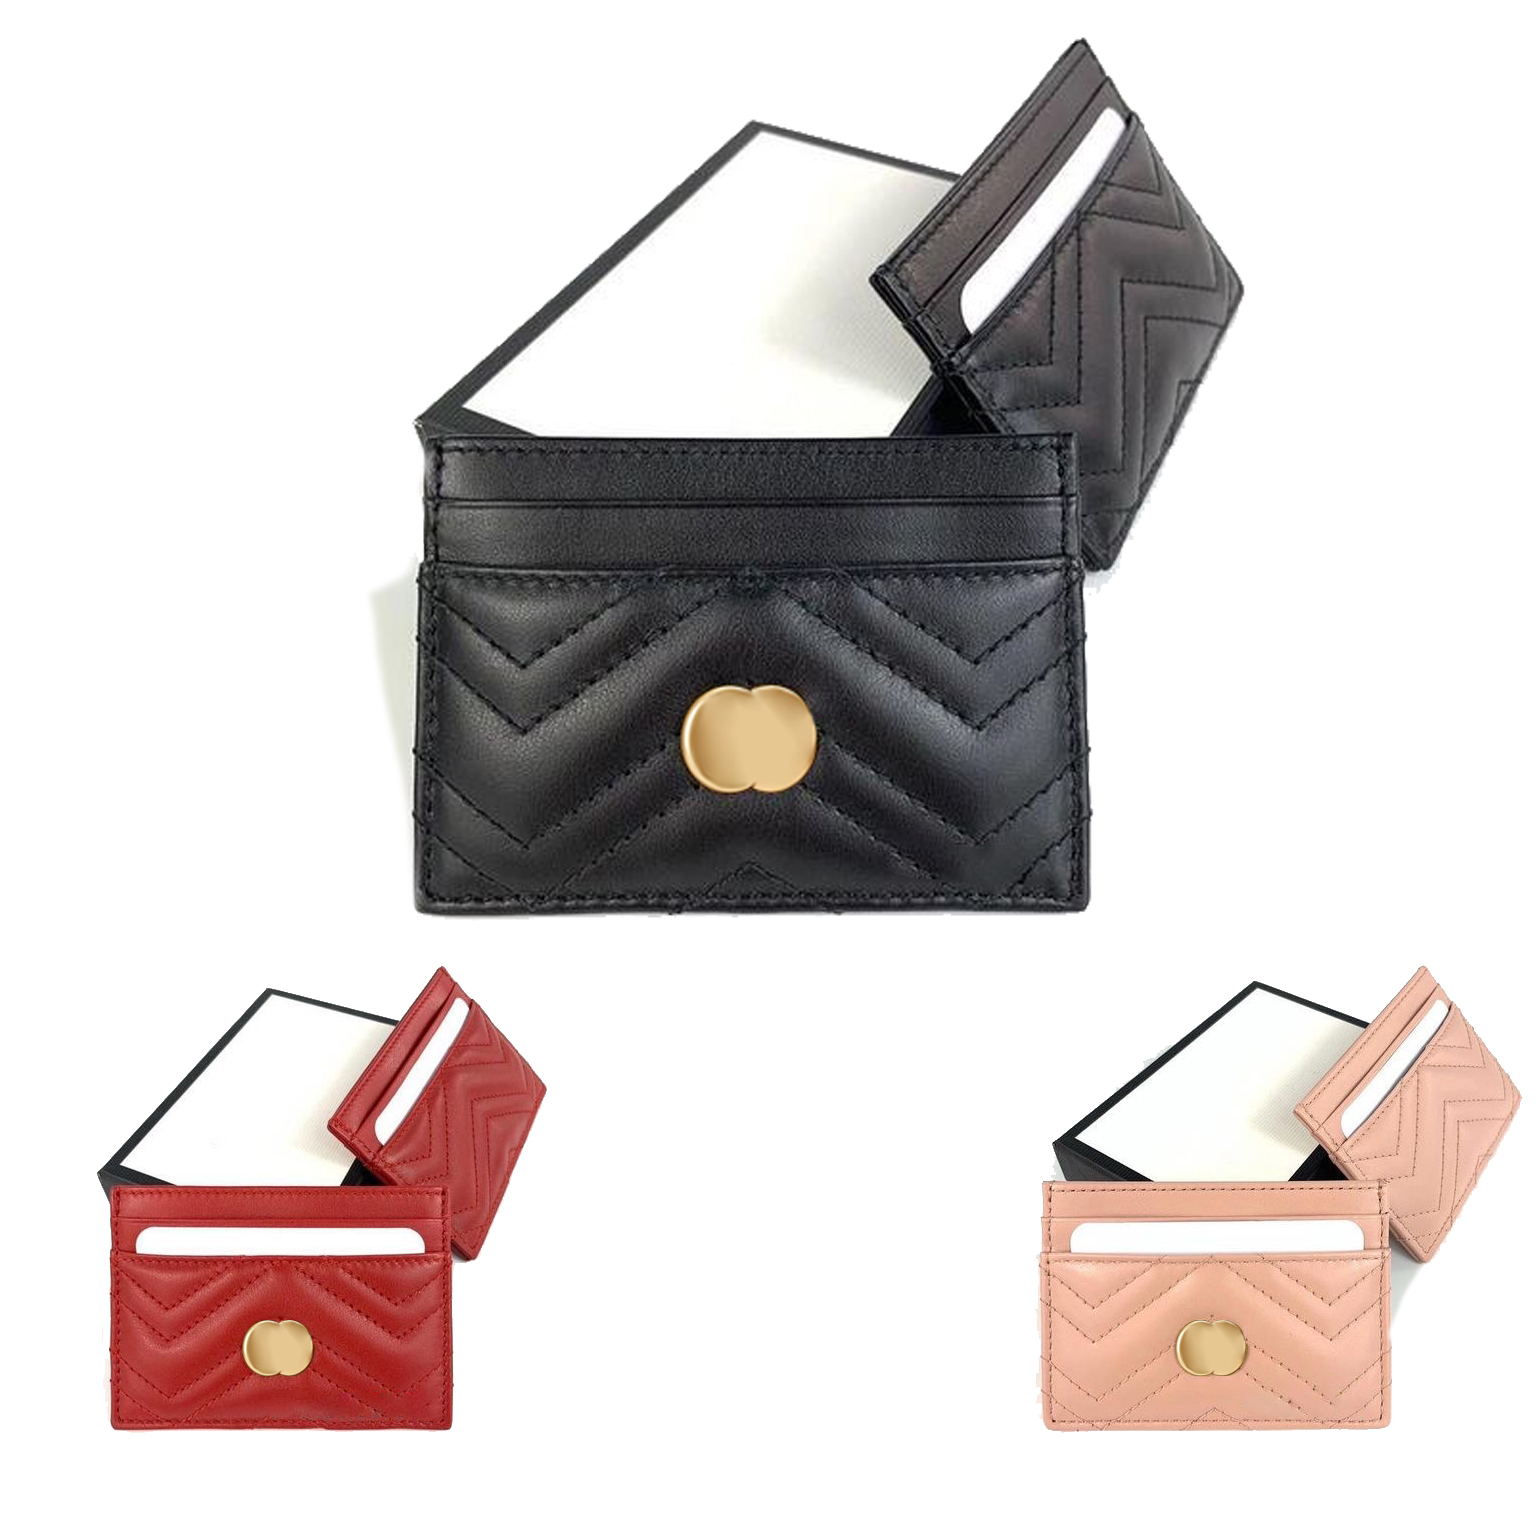 

Graffiti cards holder caviar wallets coin purse with box Womens mens Gift fashion Designer Leather little bee Matelasse Fragment cardholder key pouch wallet puese, Cc-black